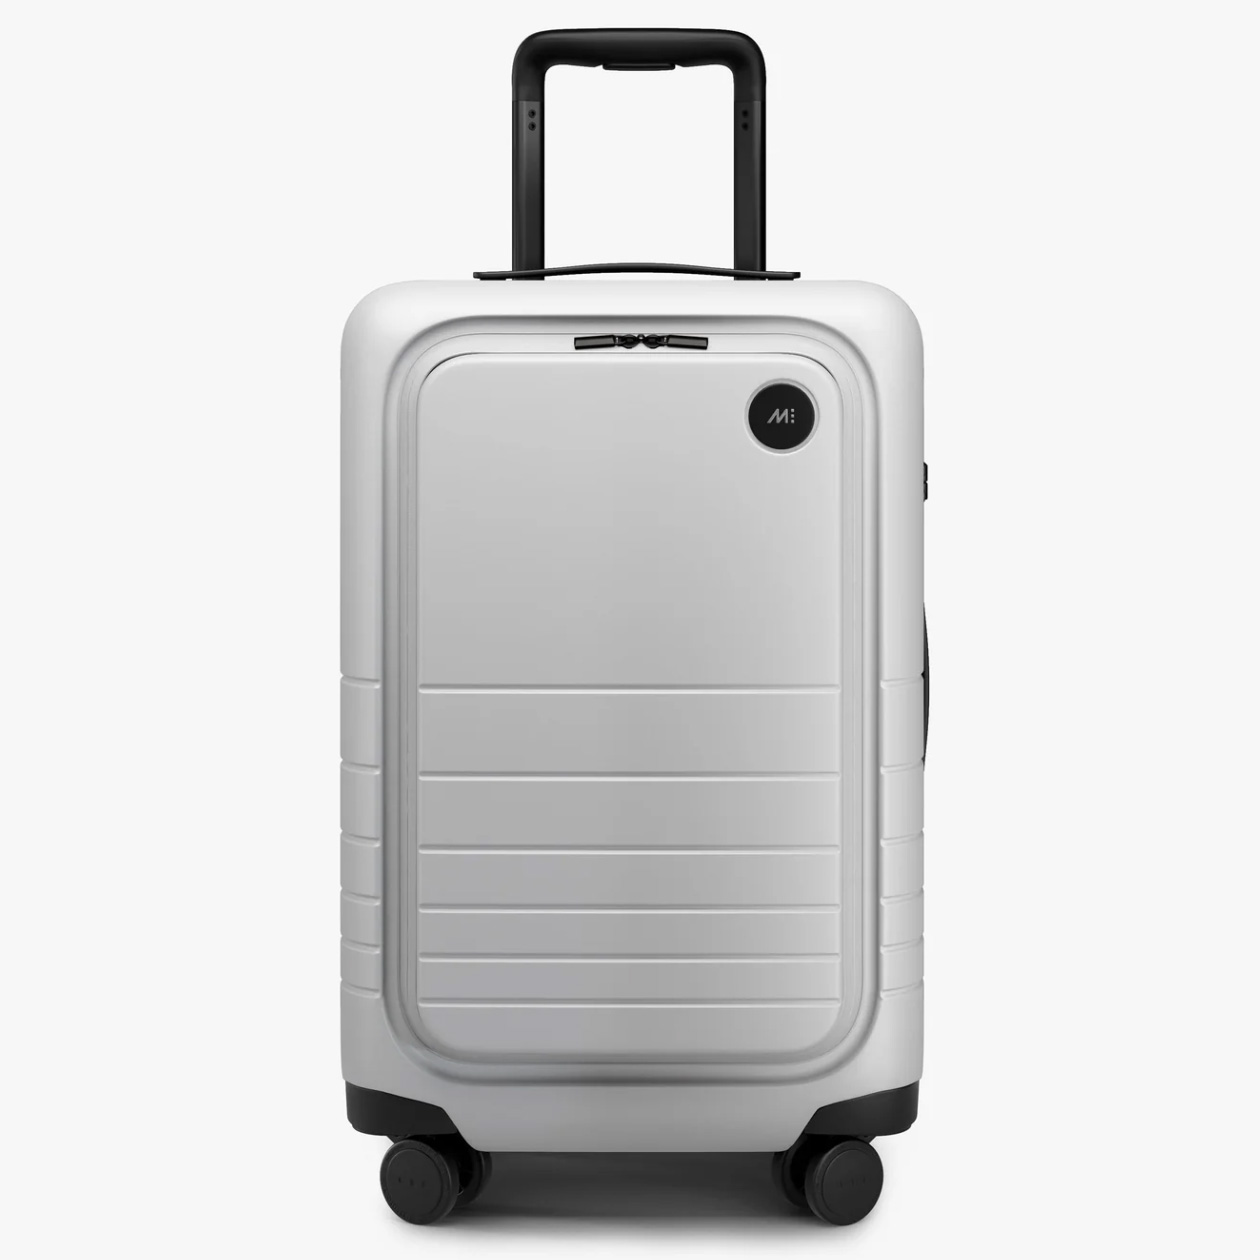 Hardside spinner luggage in silver